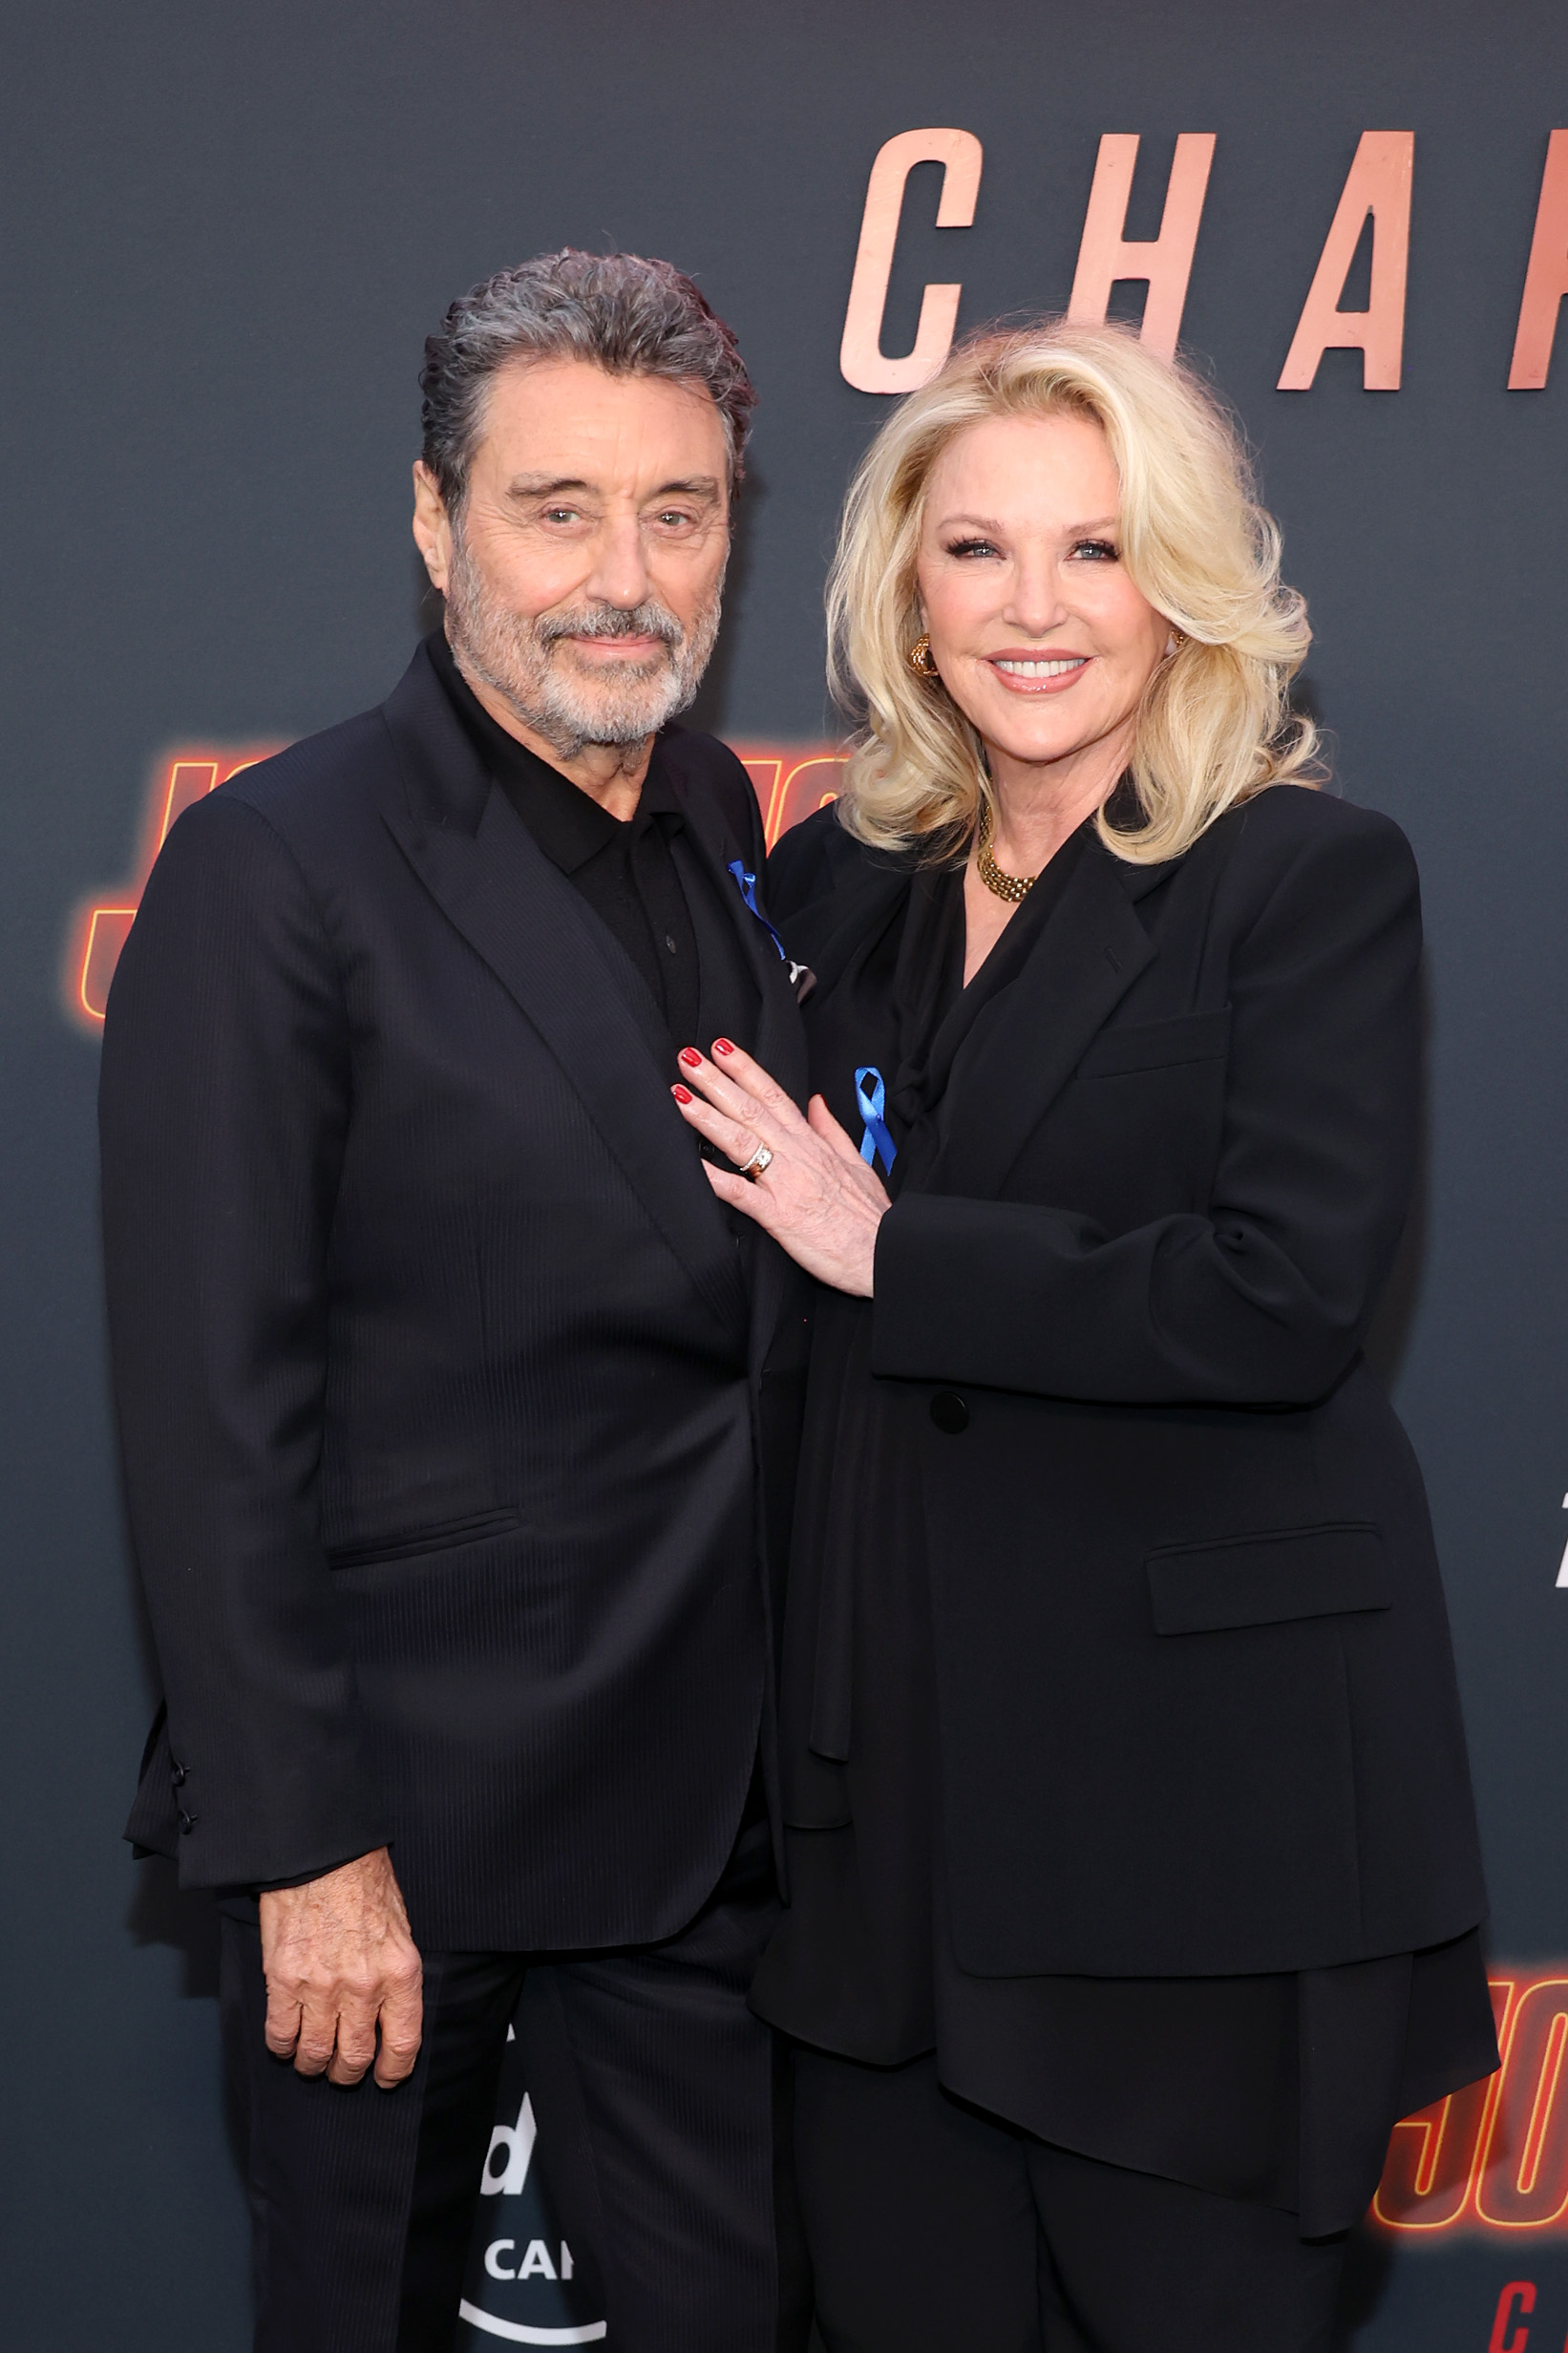 Ian McShane and his wife Gwen Humble attend the Los Angeles Premiere of "John Wick: Chapter 4" at TCL Chinese Theatre on March 20, 2023 in Hollywood, California | Source: Getty Images